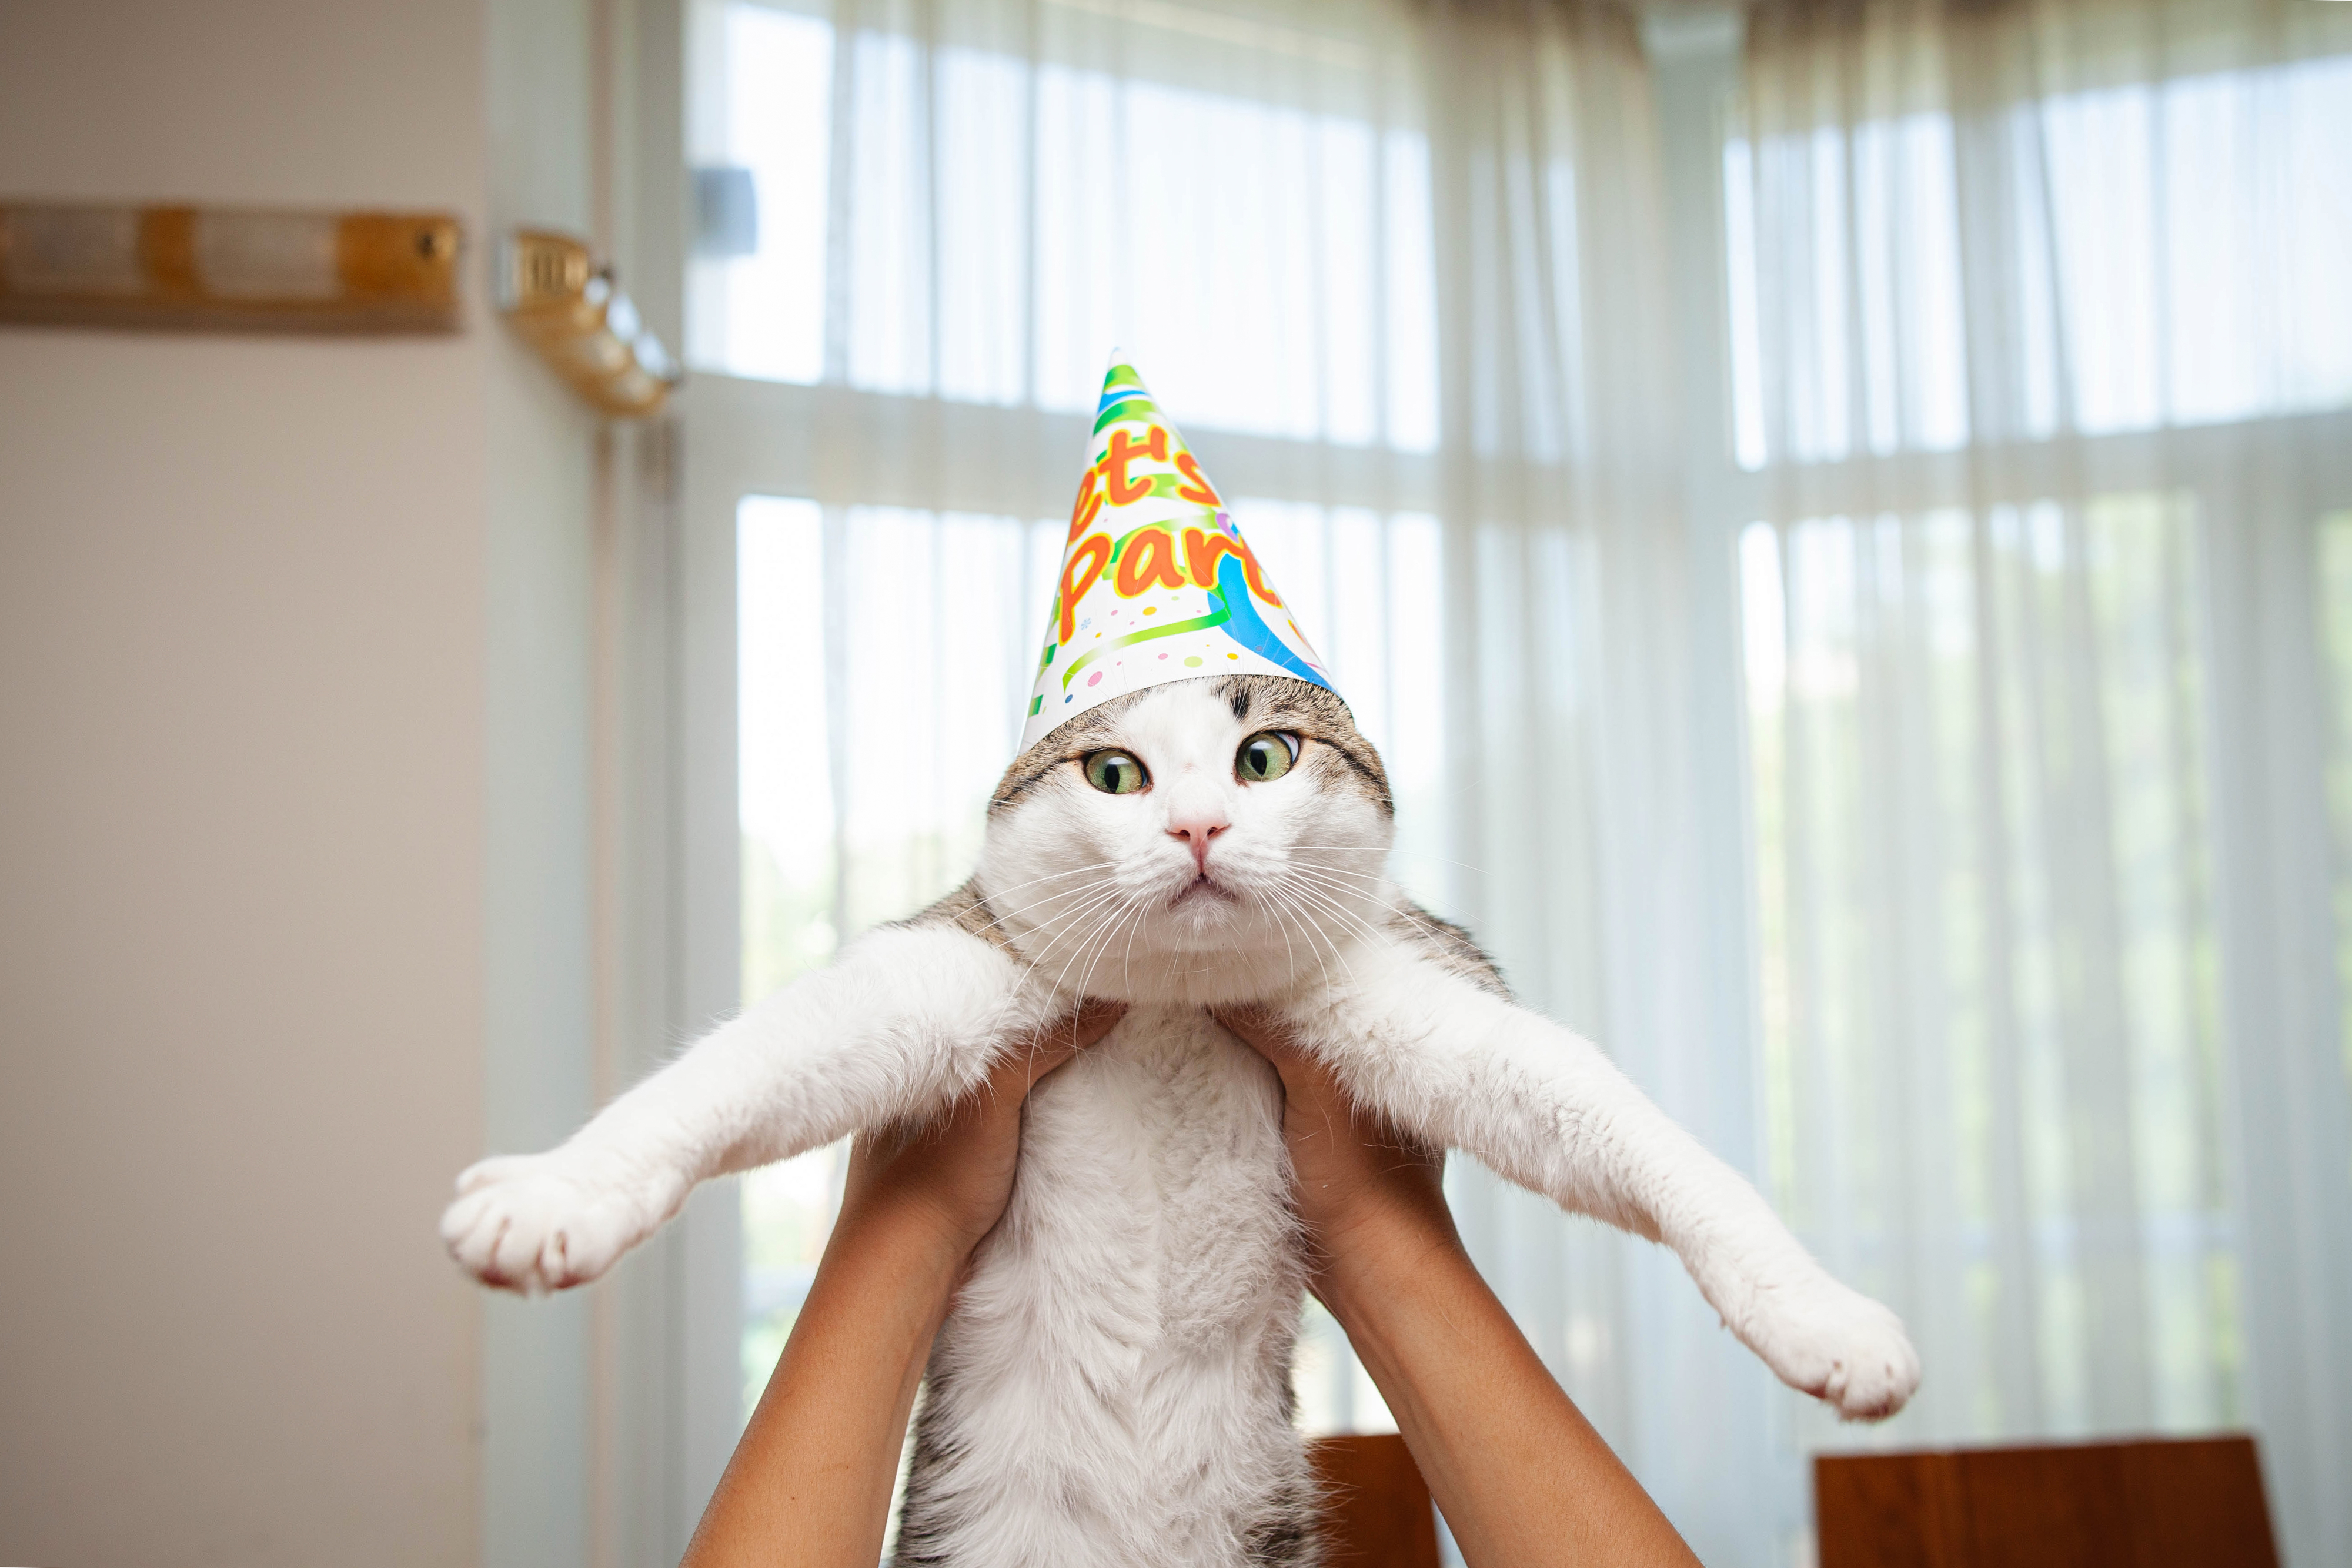 A cat wearing a birthday hat is held up in front of a window, looking directly at the camera